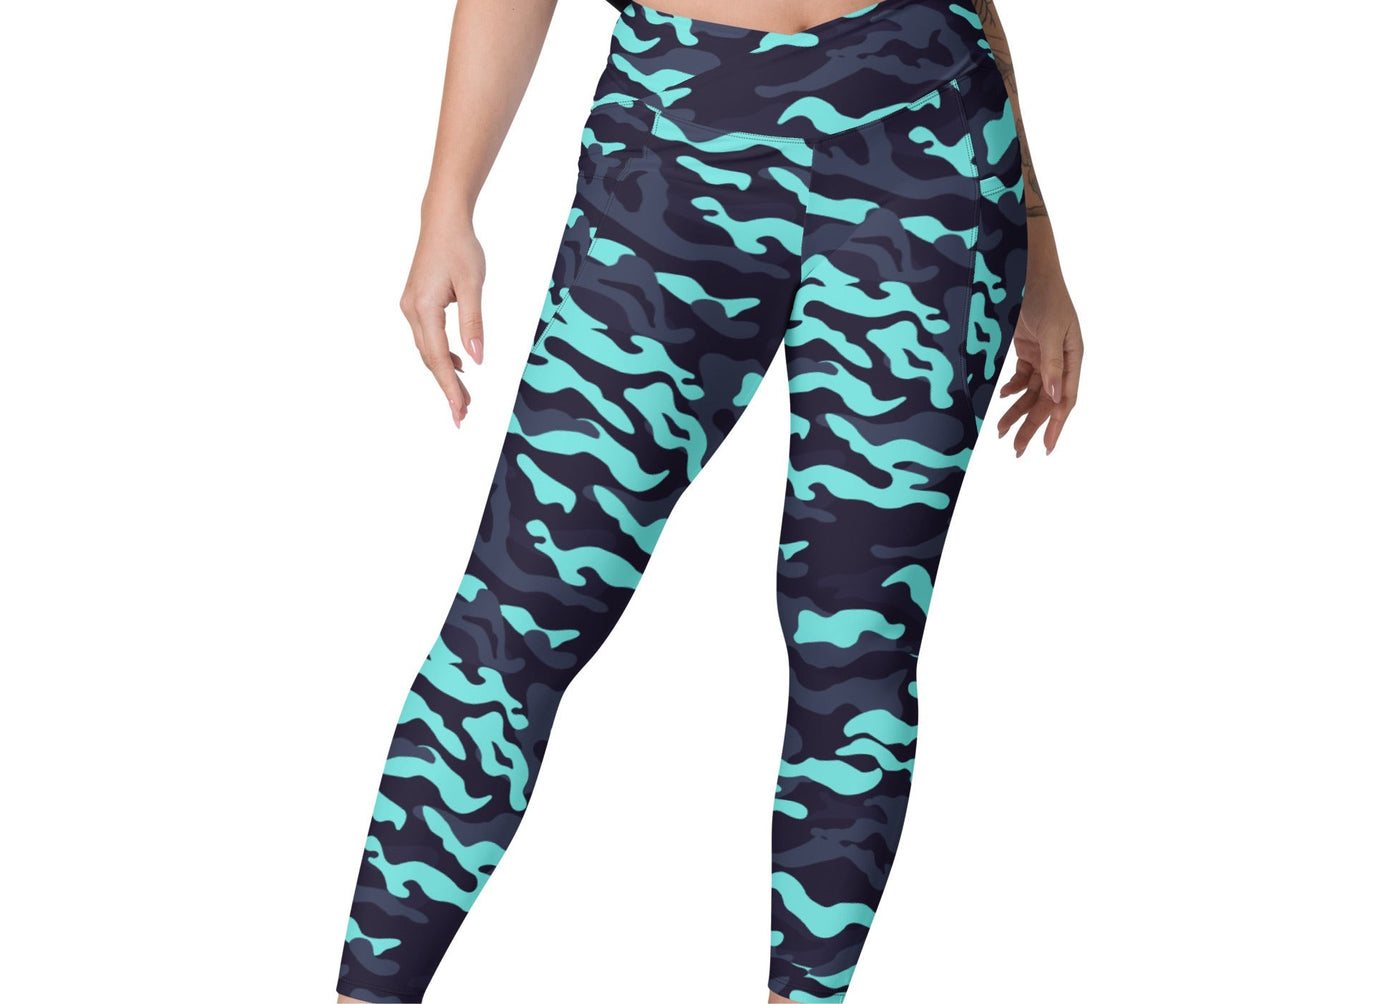 CamoFit Crossover Leggings with Pockets